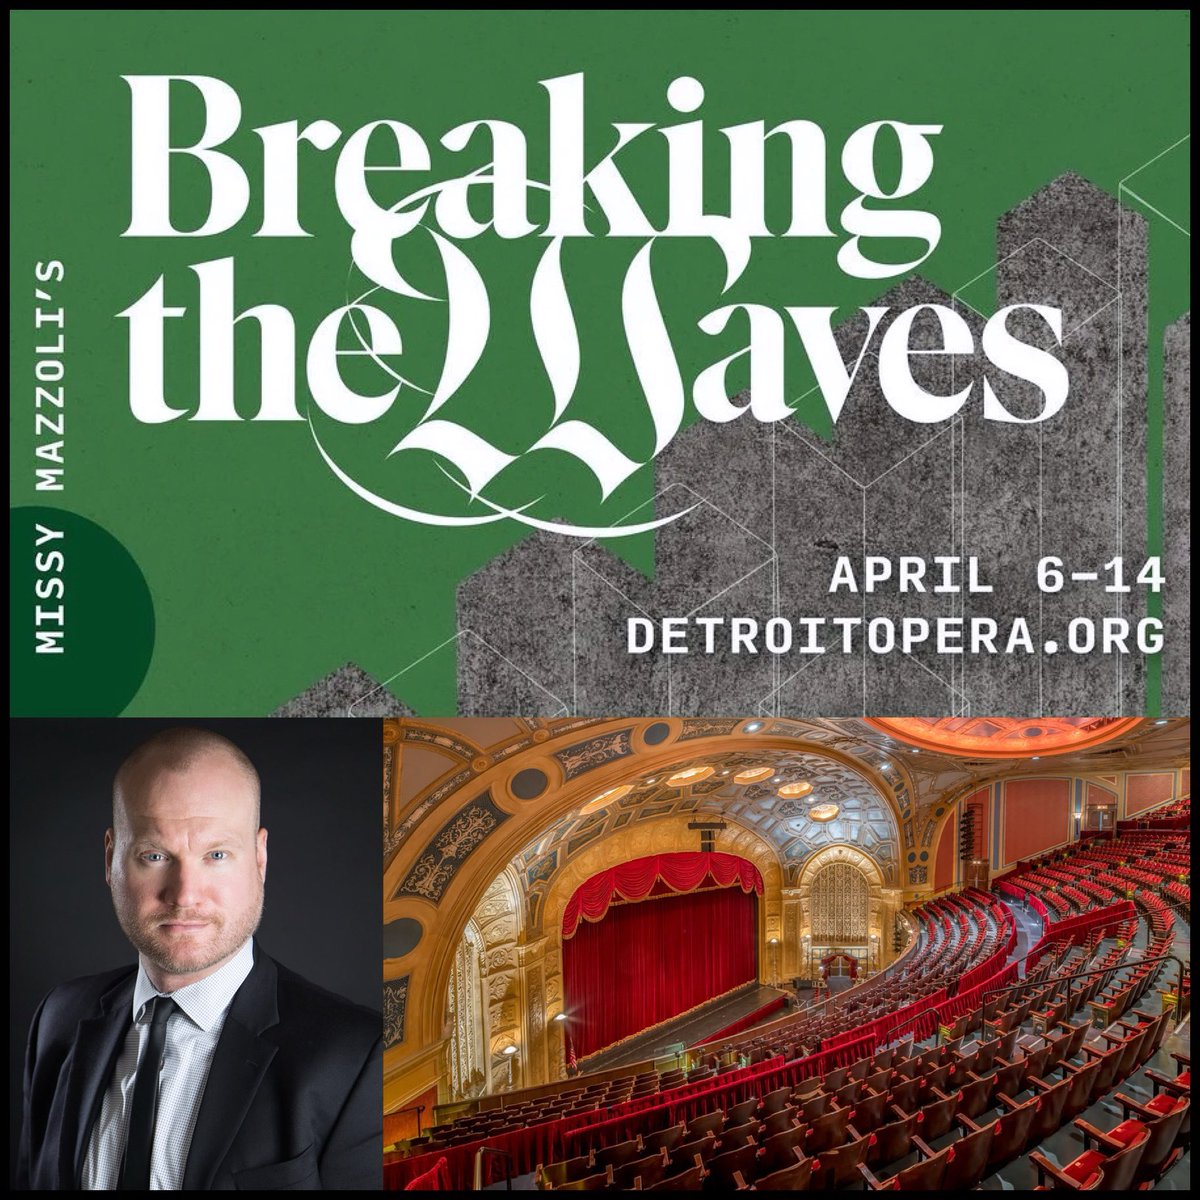 Looking forward to jumping into this fantastic score and making a company debut with Detroit Opera this next month! #Opera #Detroit #DetroitOpera #BreakingtheWaves